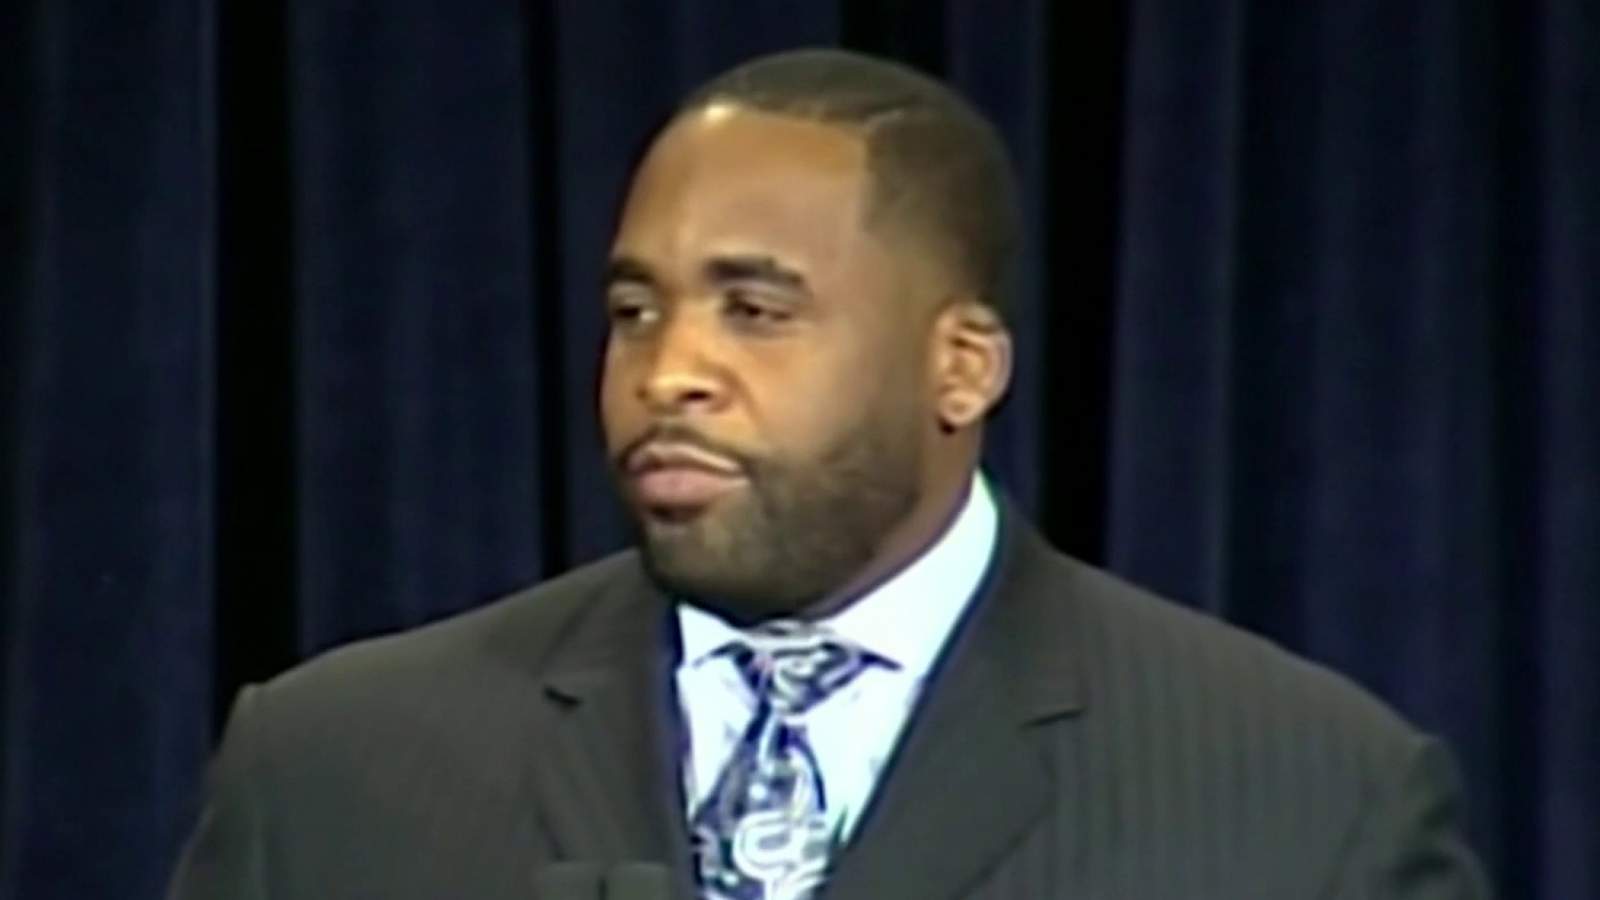 Kwame Kilpatrick to be released -- What’s next for the former Detroit mayor?